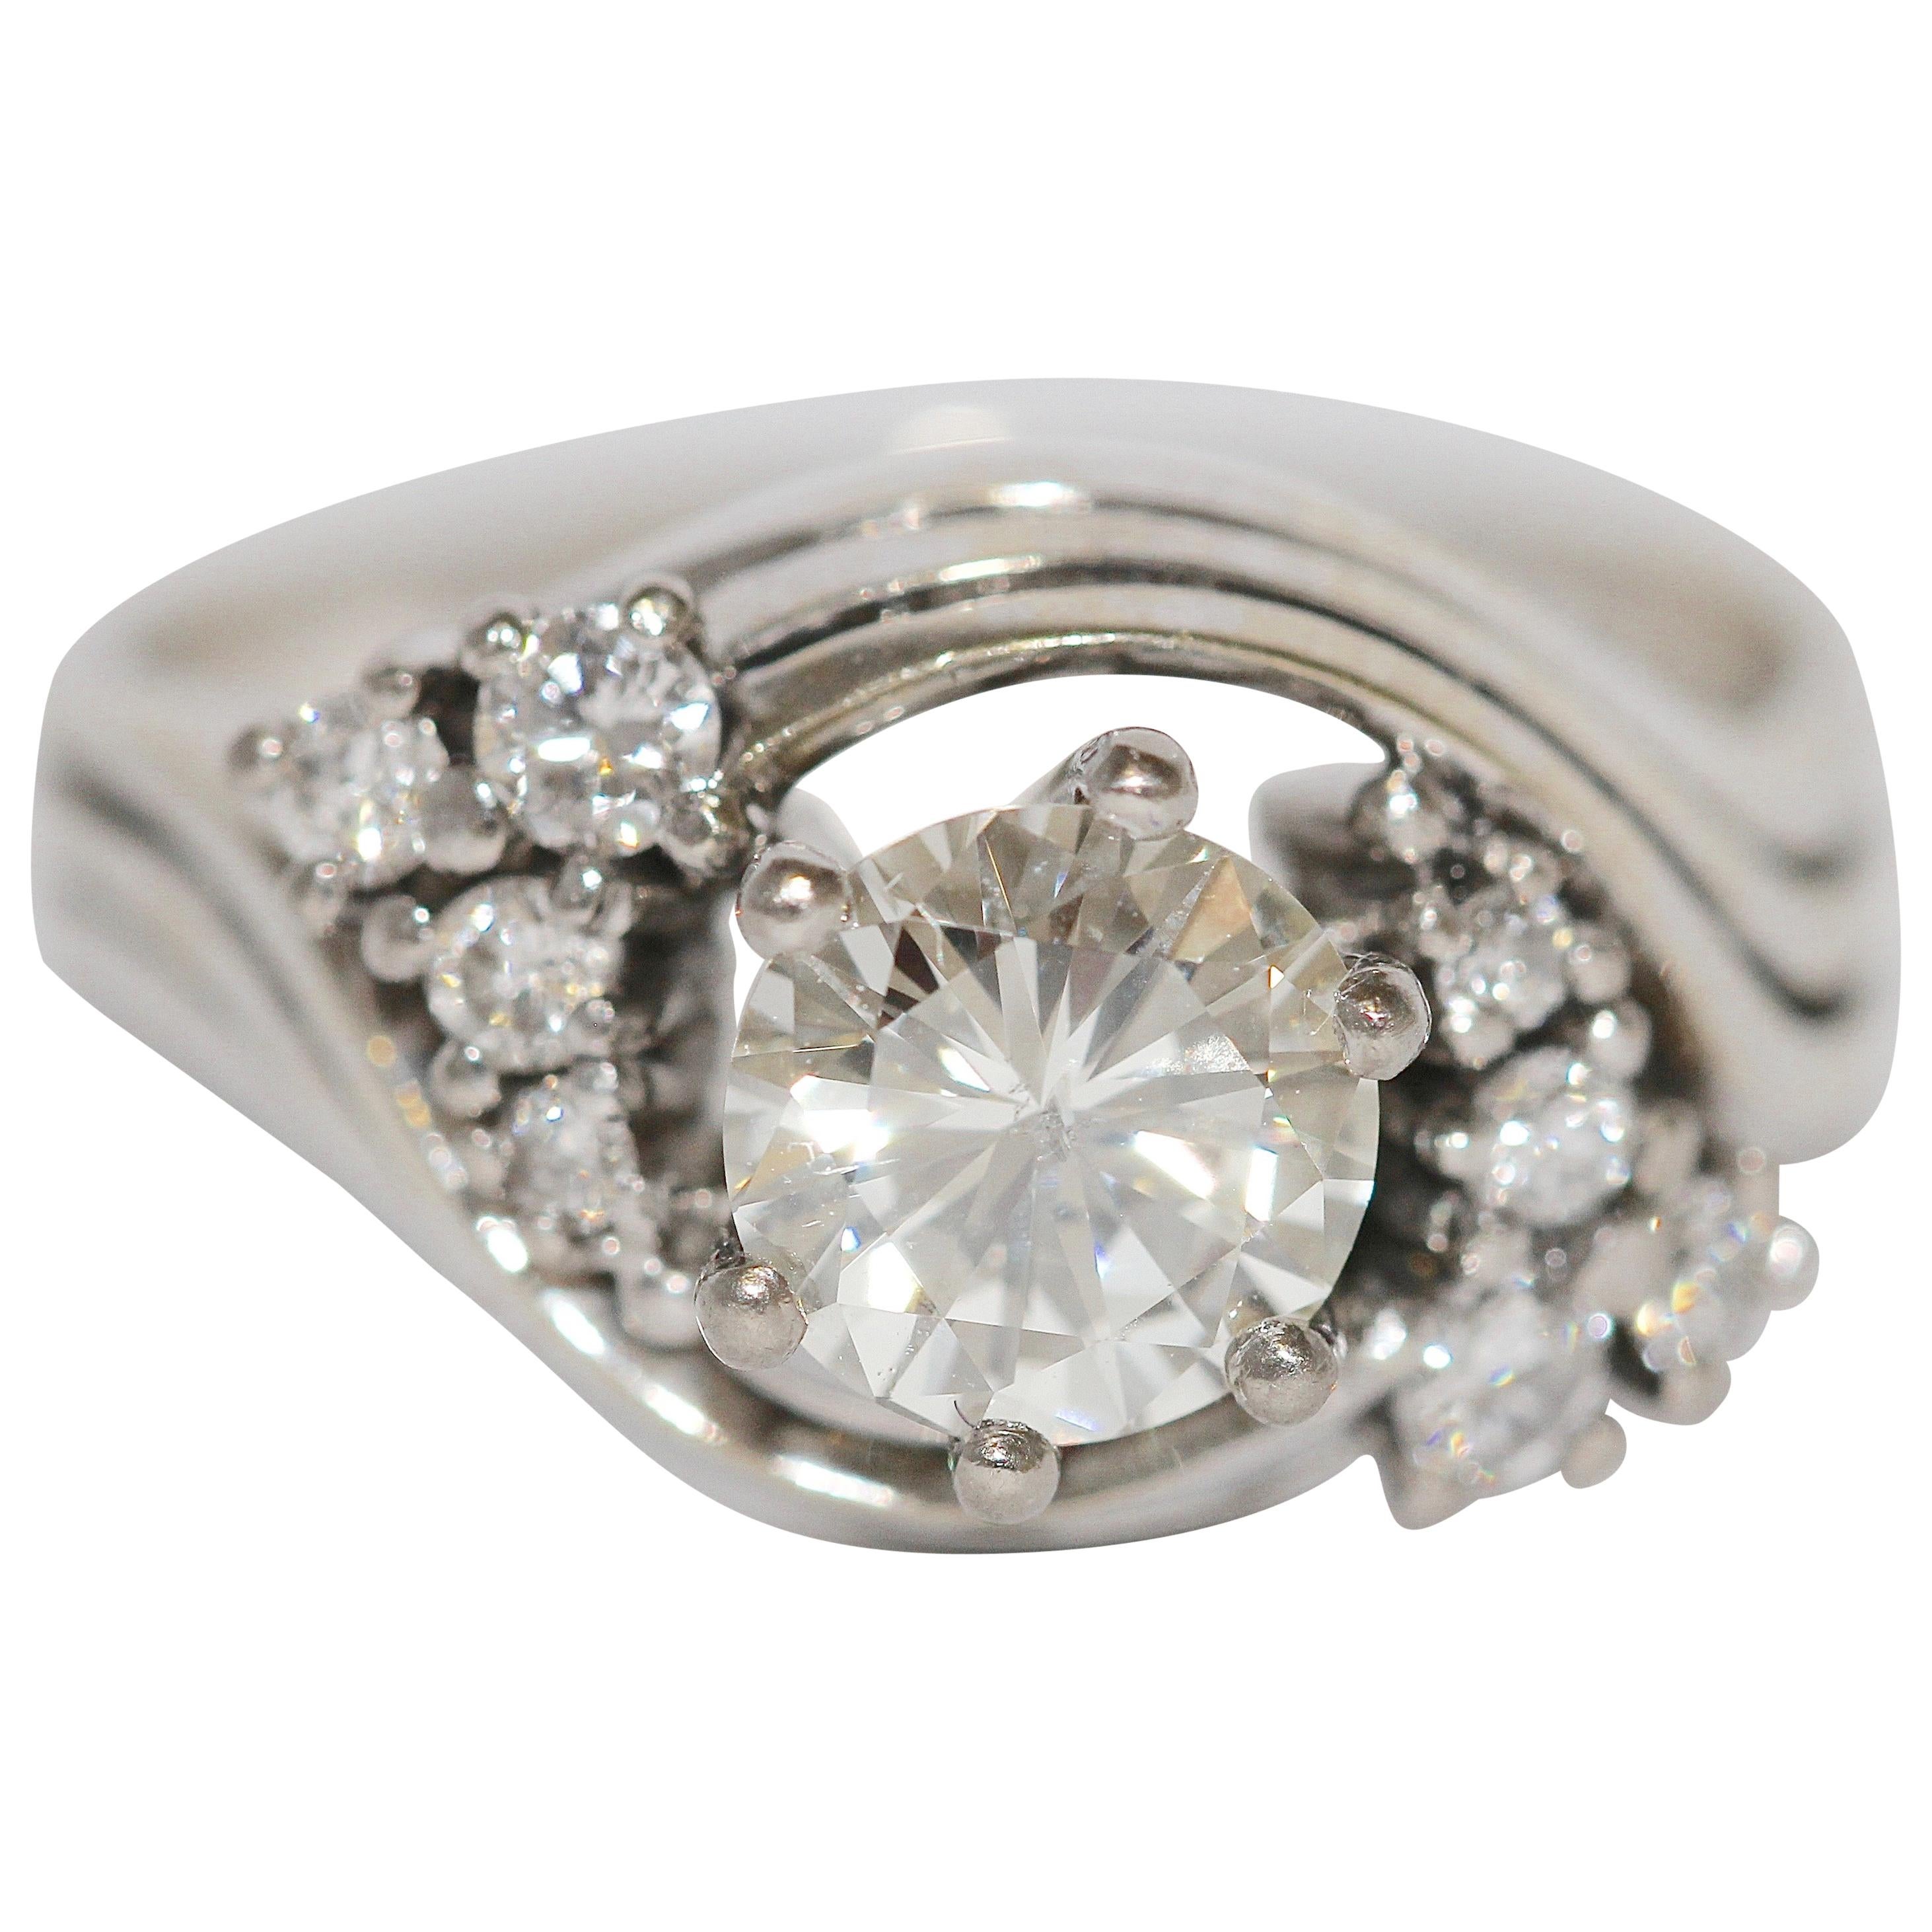 Diamond Bridal Ring with Solitaire 1.05 Carat, Top Wesselton, SI2, 18 Karat Gold